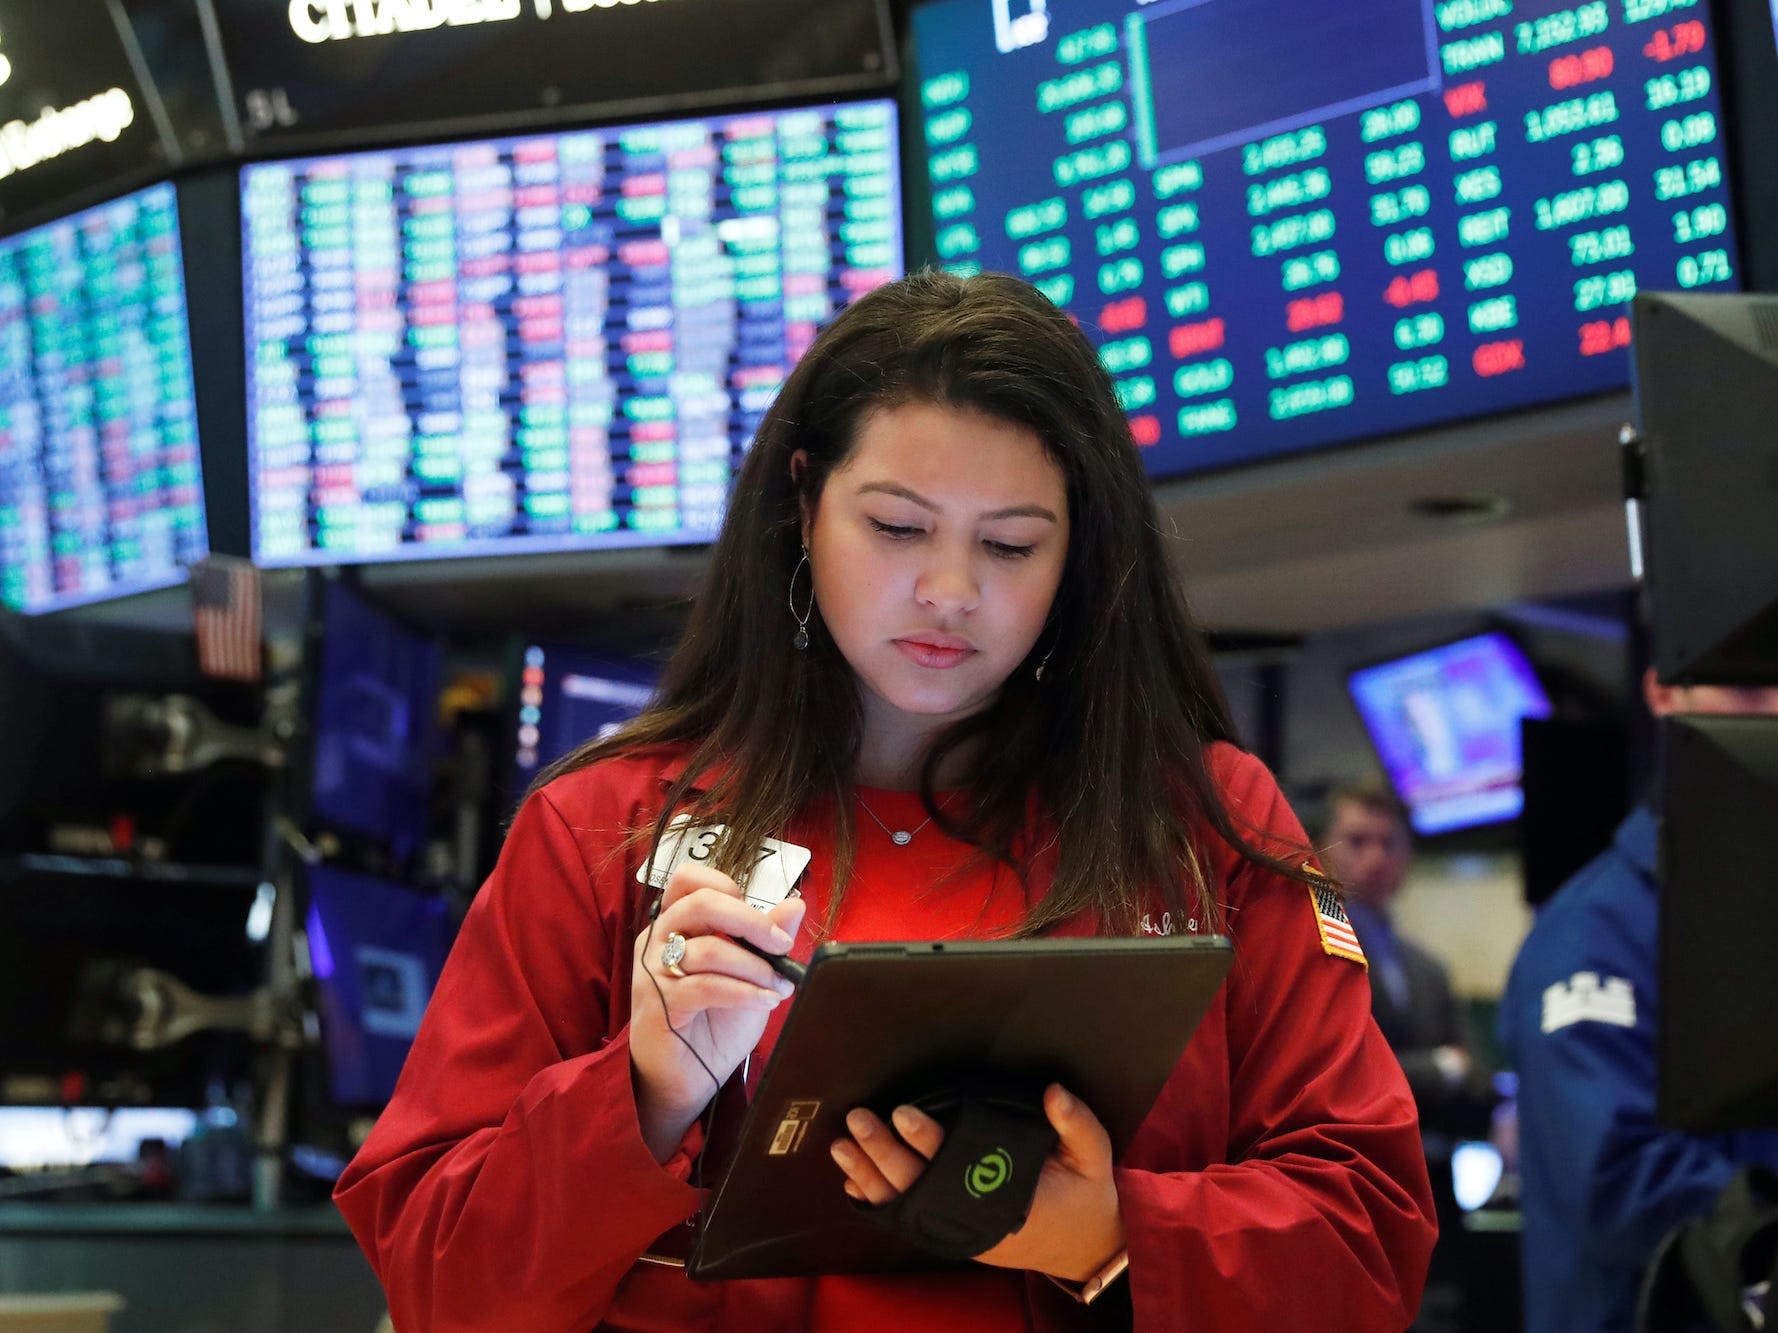 Stock market today: US stocks look to rebound after inflation worries sparked 2-day decline